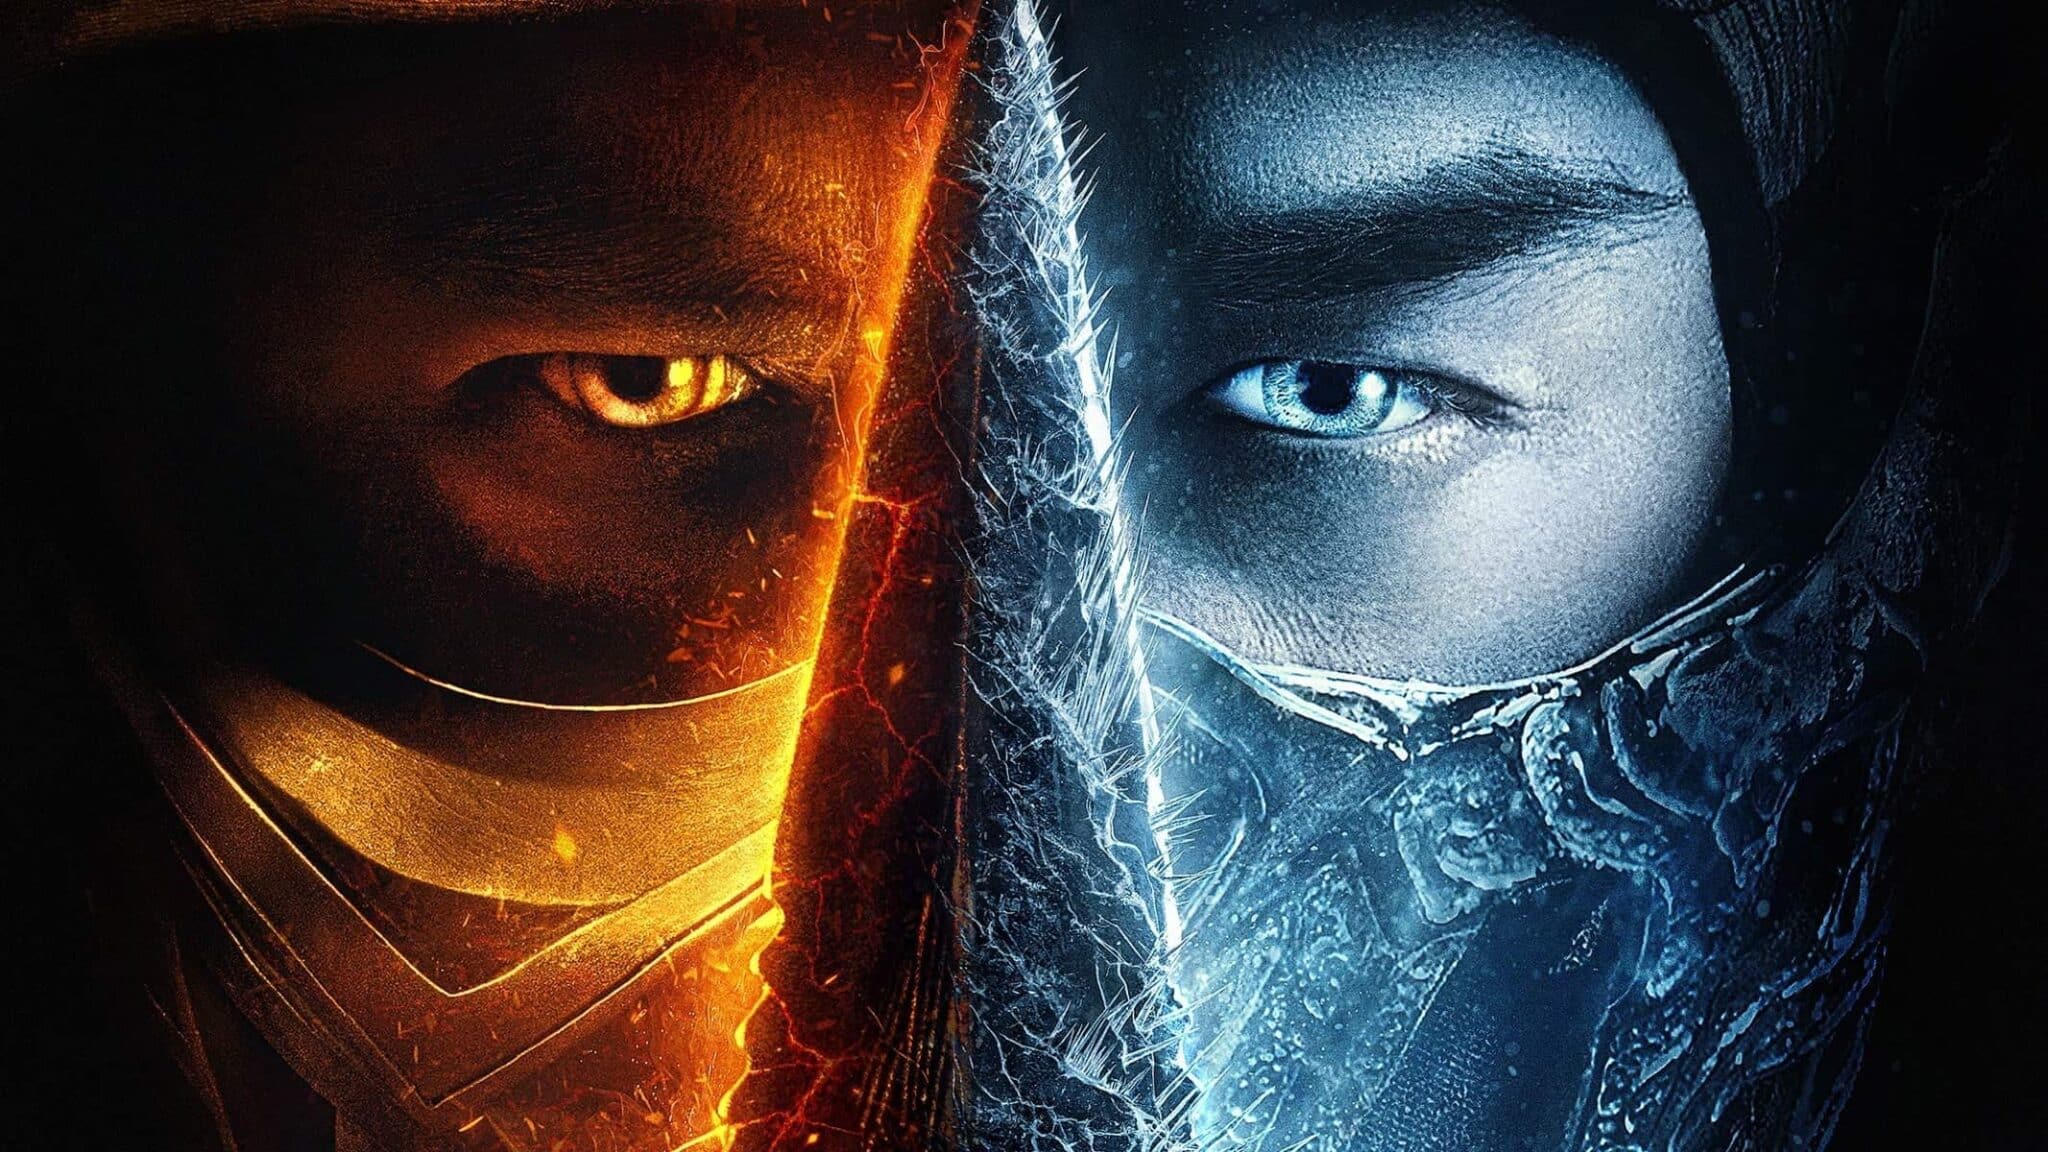 WATCH The First 7 Minutes of The Mortal Kombat Movie